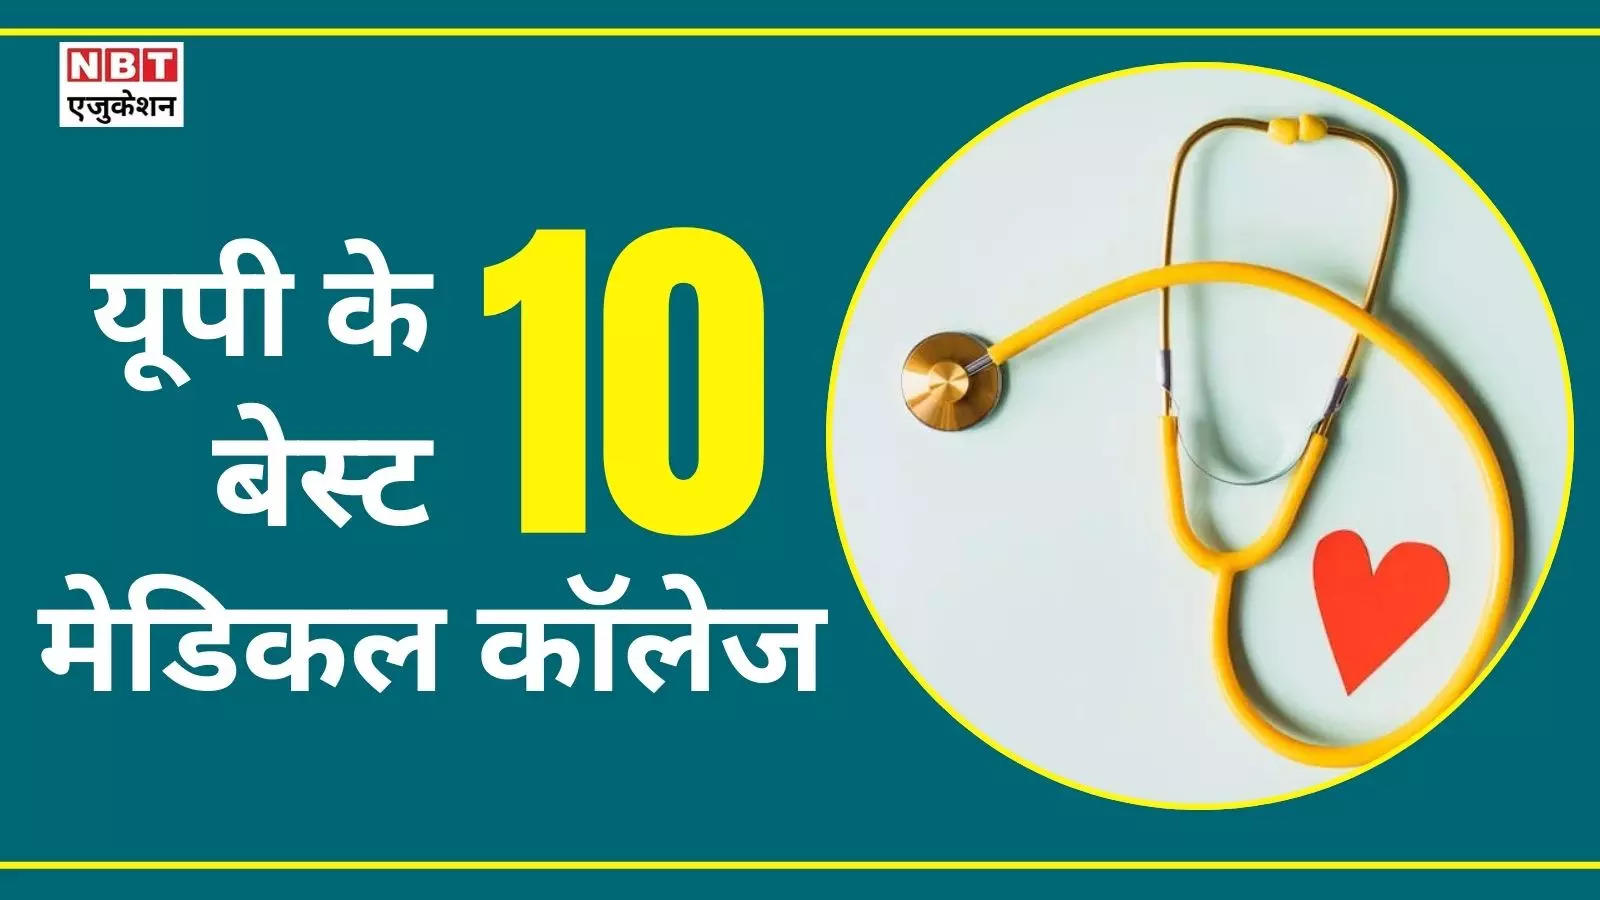 Top Medical Colleges in UP: These are the top 10 medical colleges of UP, best for MBBS, 'number-1' in placements too